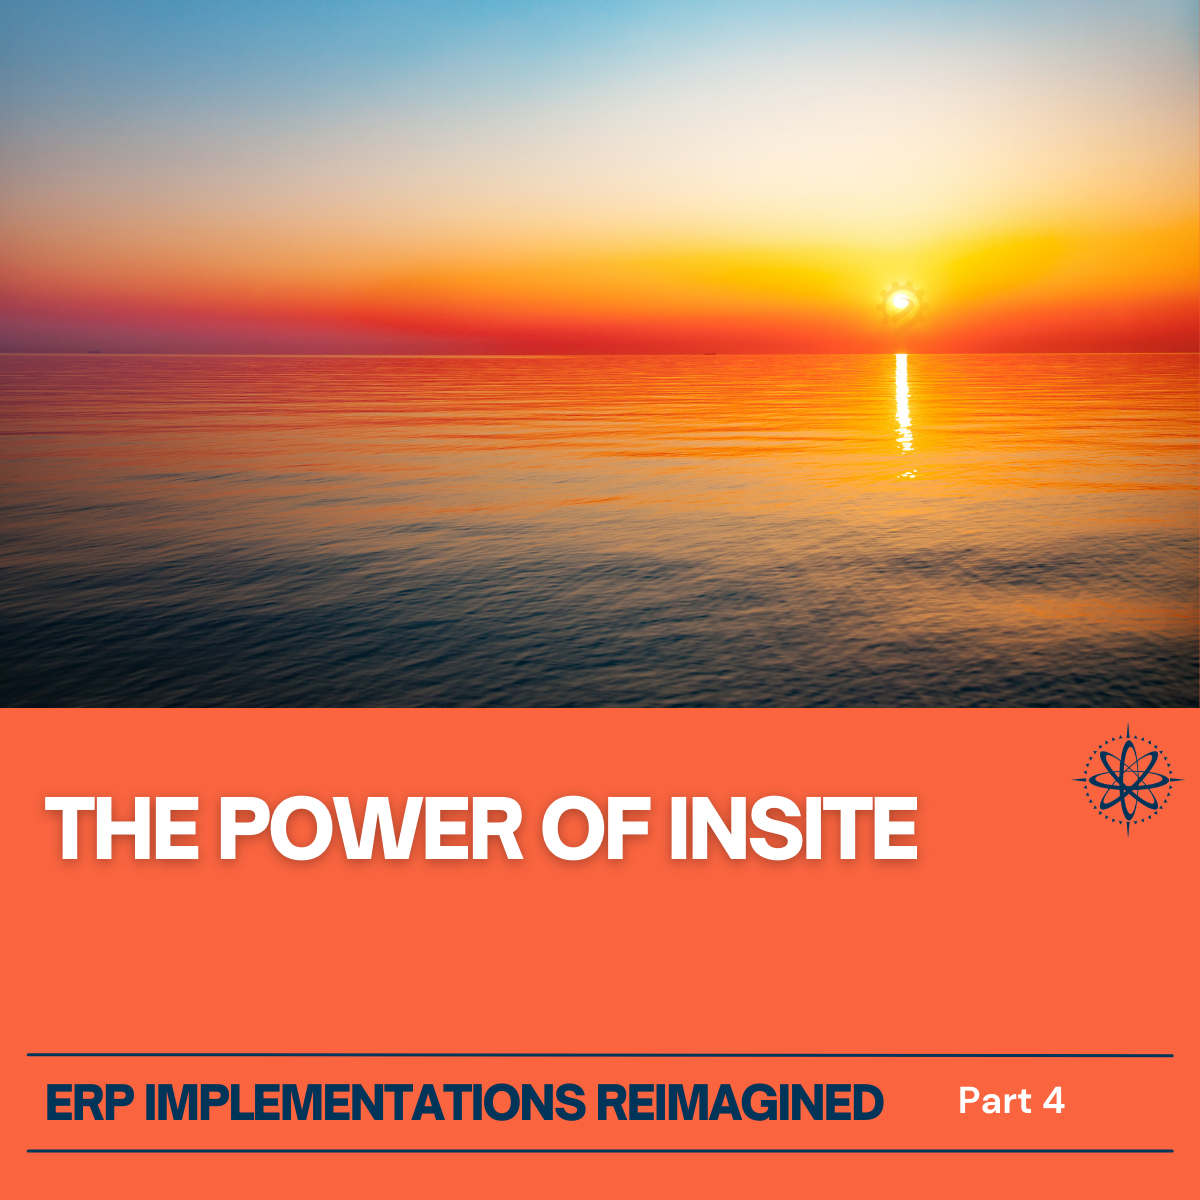 The sun rising on a new era in erp implementations